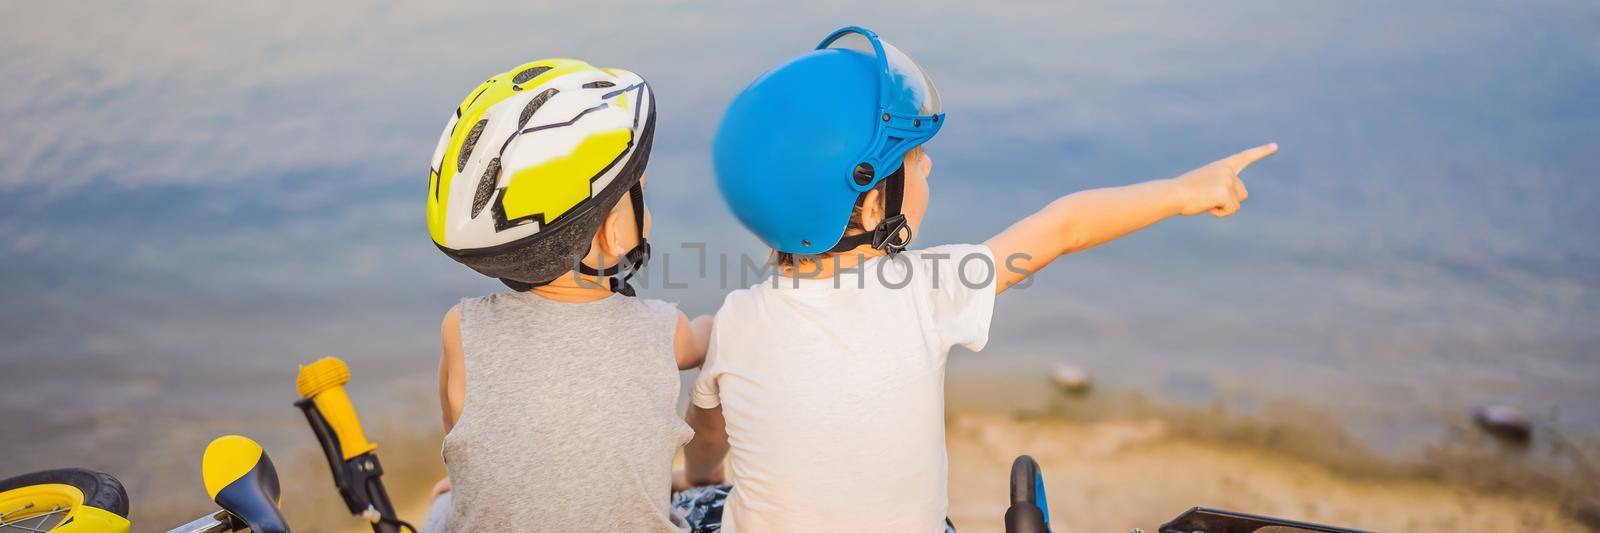 Two boys sit on the shore of the lake after riding a bike and scooter BANNER, LONG FORMAT by galitskaya